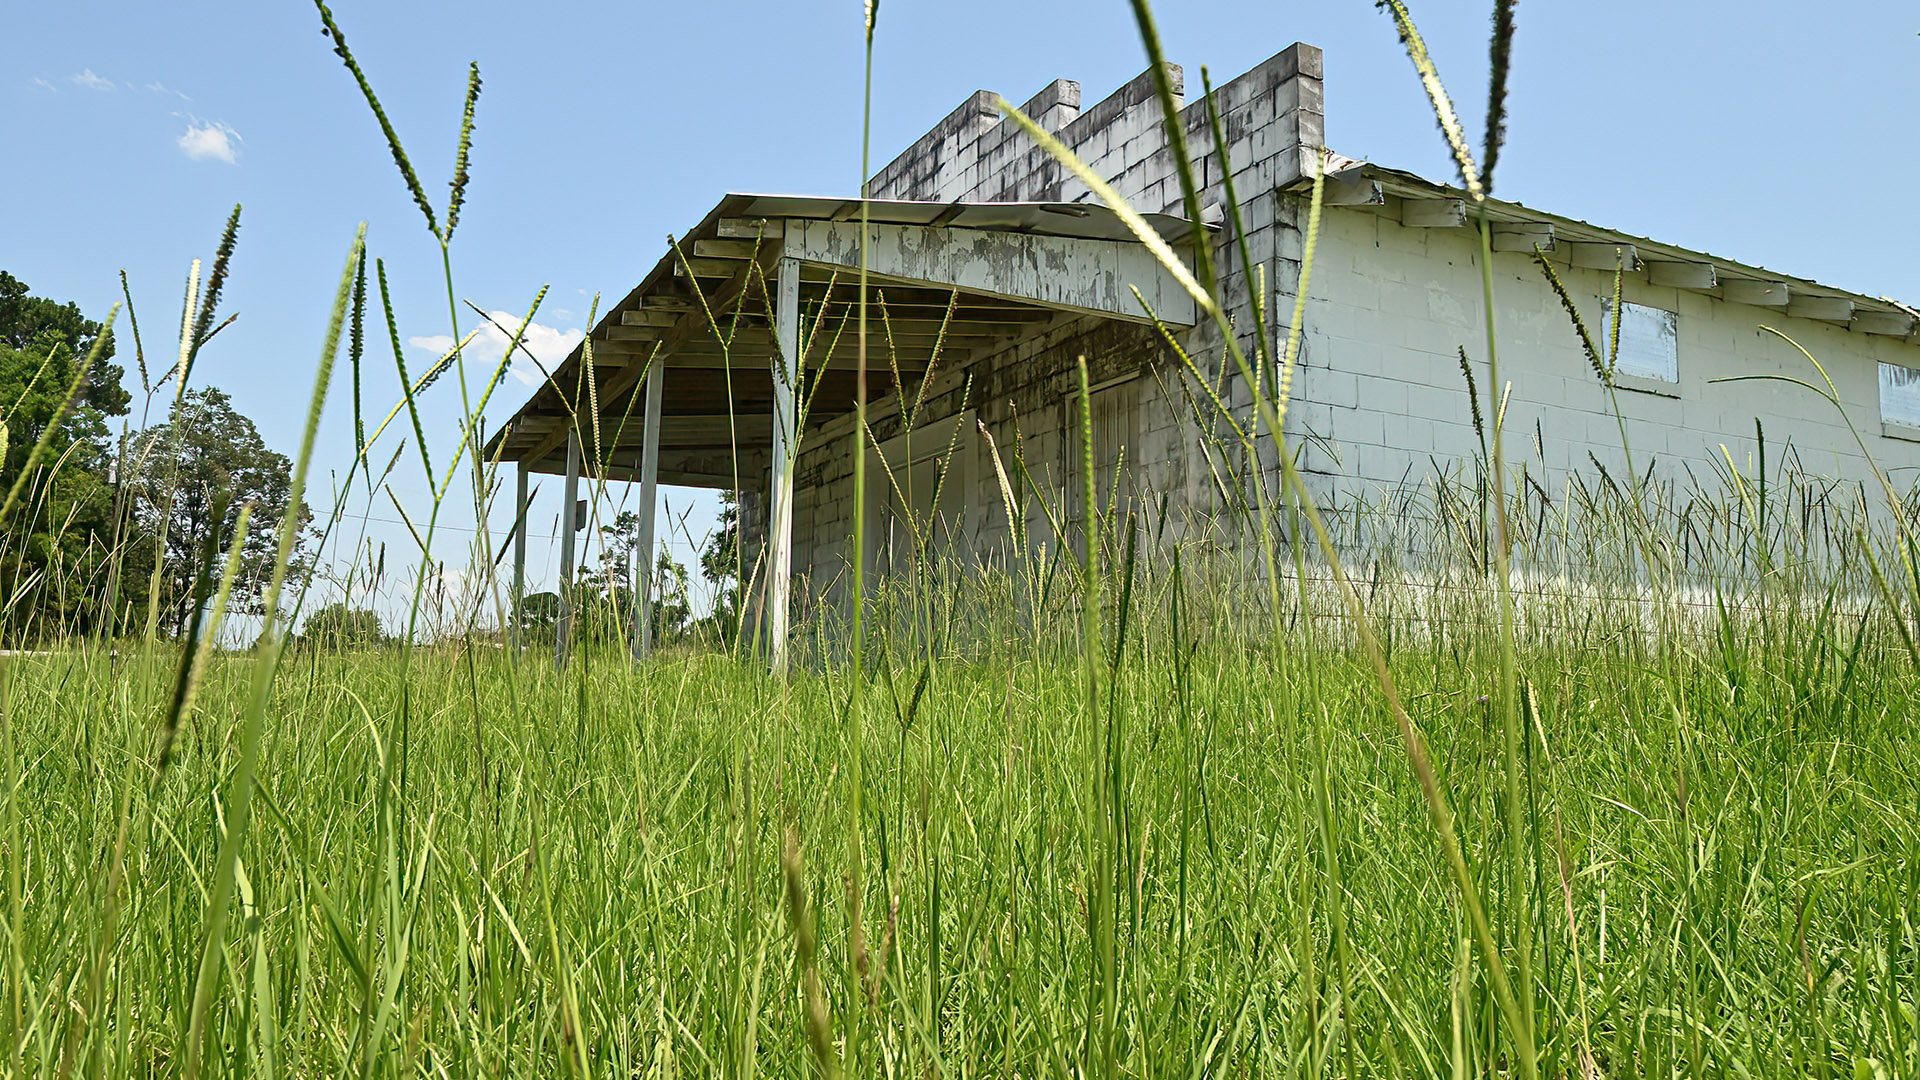 A low-angle view shows tall grasses in the foreground and a weathered single-story building in the background.